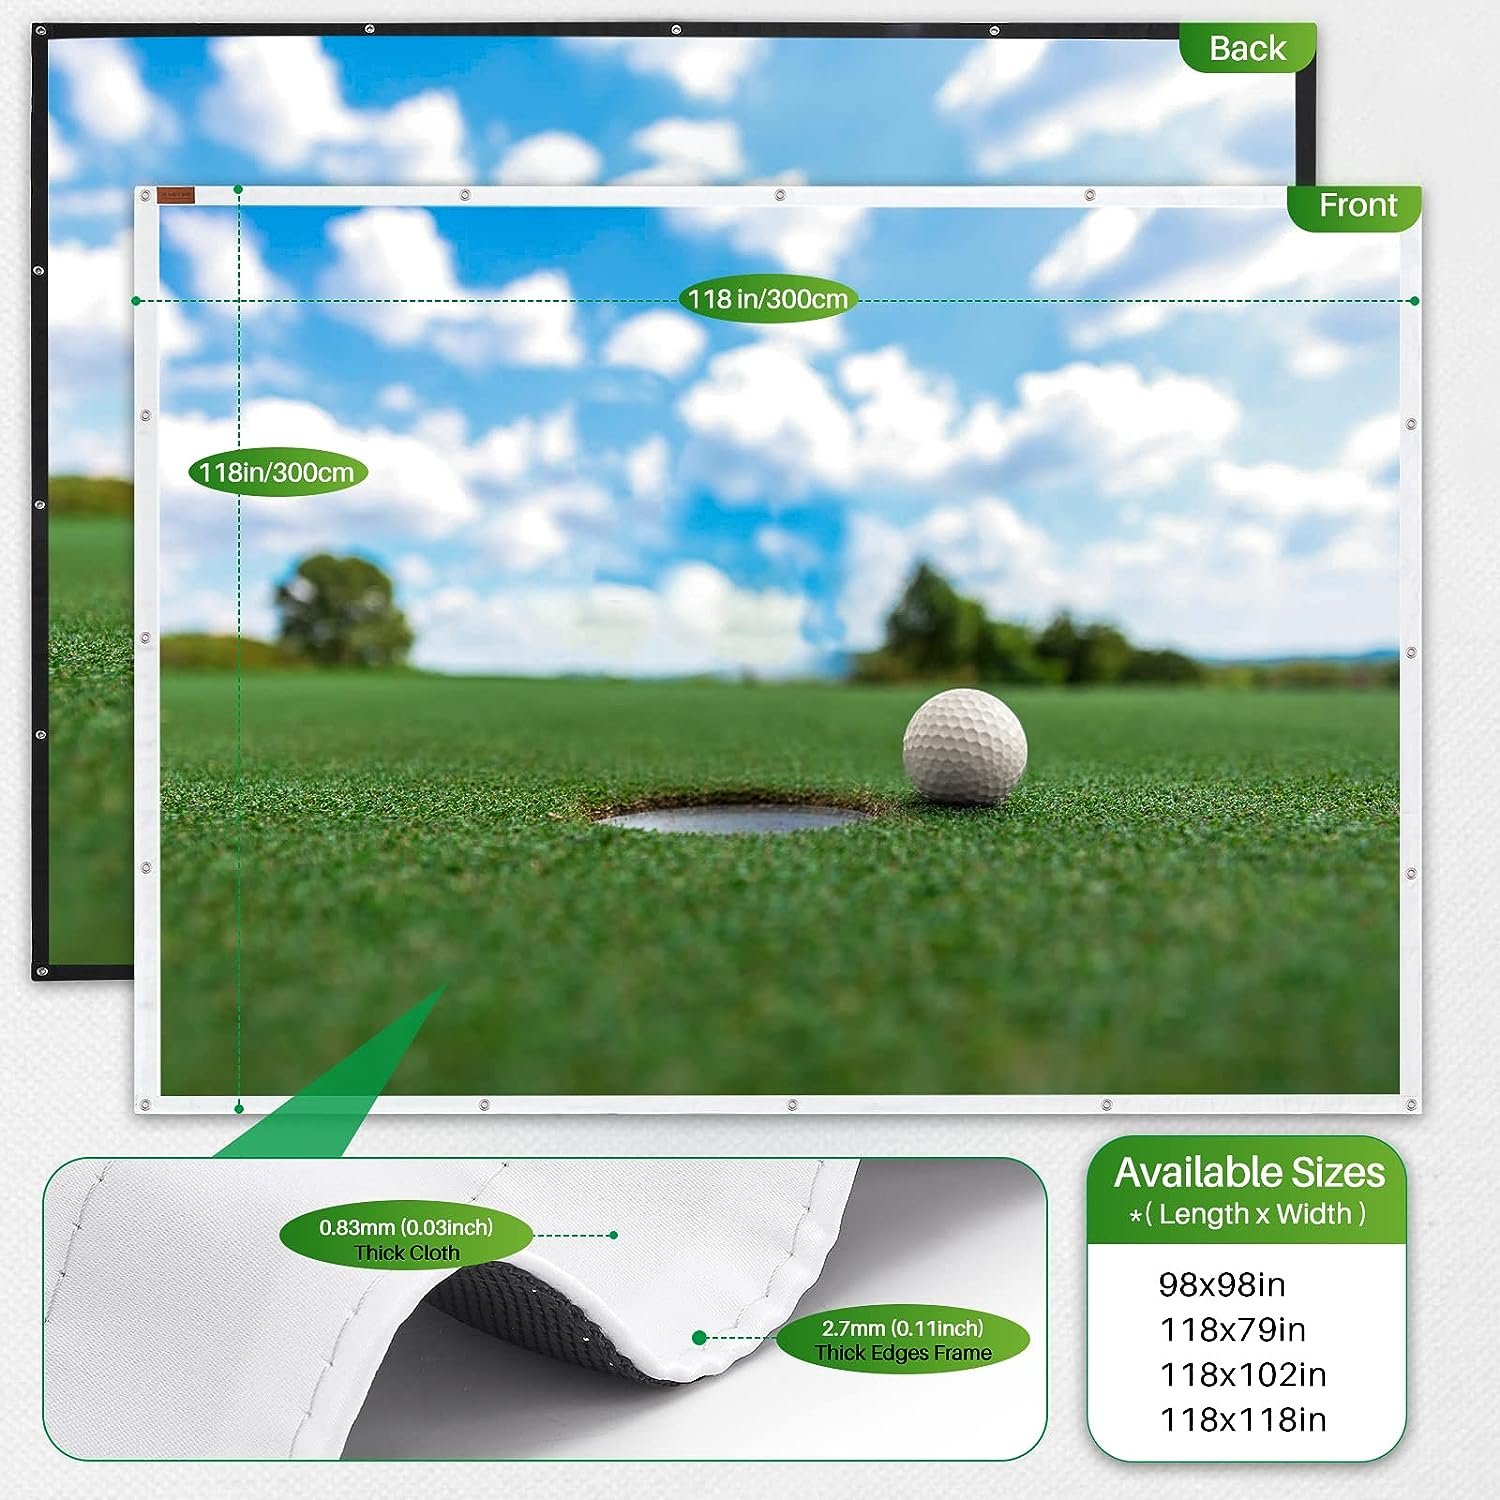 METGID Golf Simulator Impact Screen for Golf Training,16pcs Grommet Holes Family Indoor Series Available in 4 Sizes